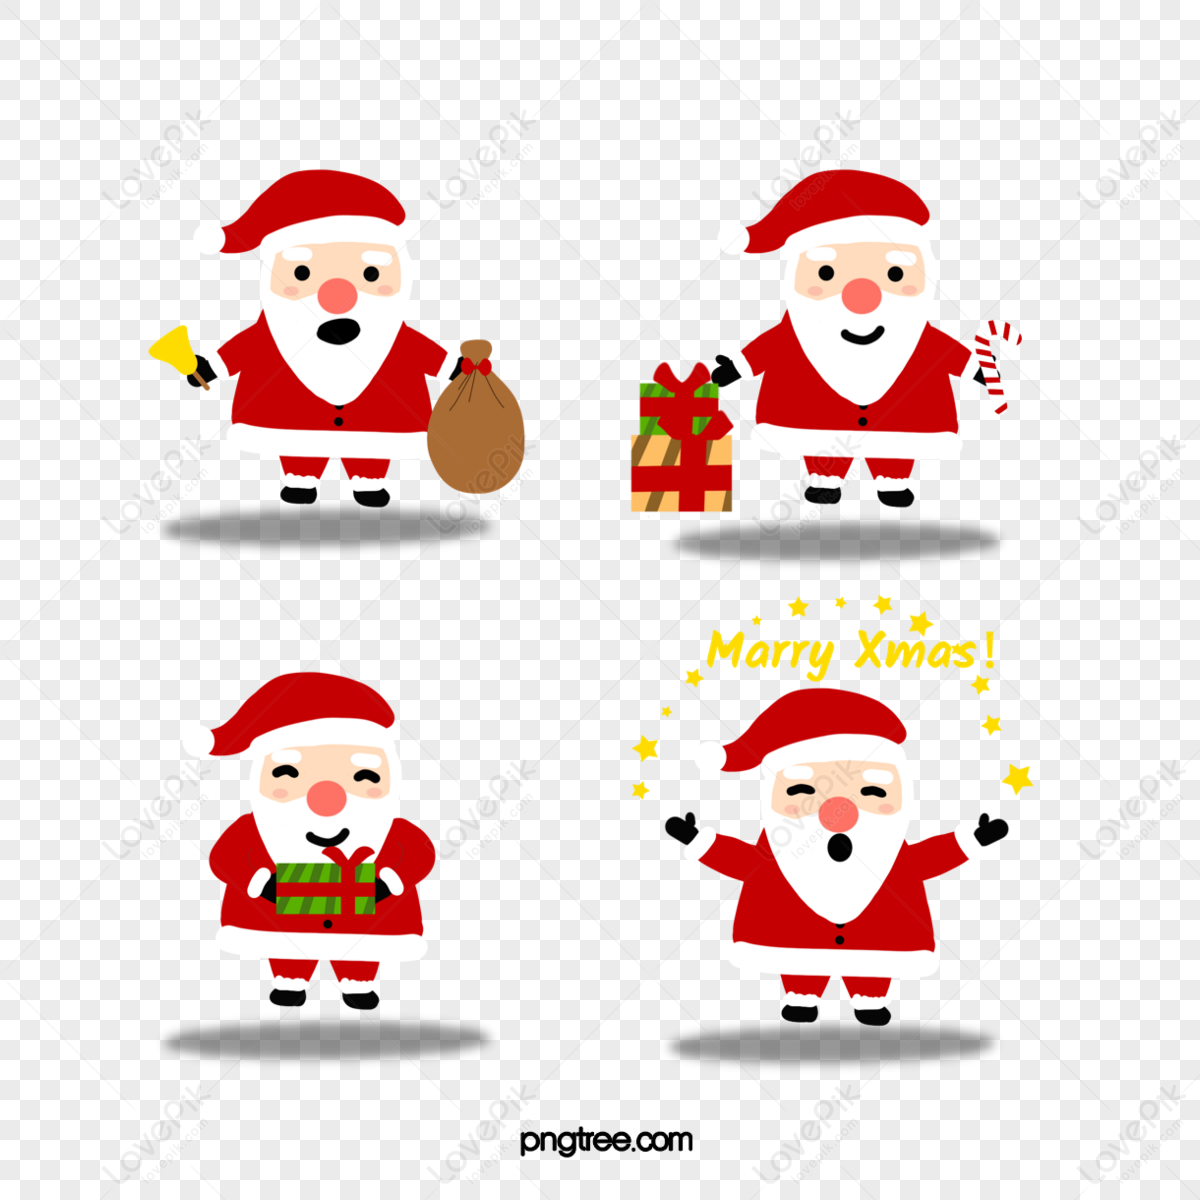 Christmas presents from Santa Claus,cheers,character,decoration png transparent image